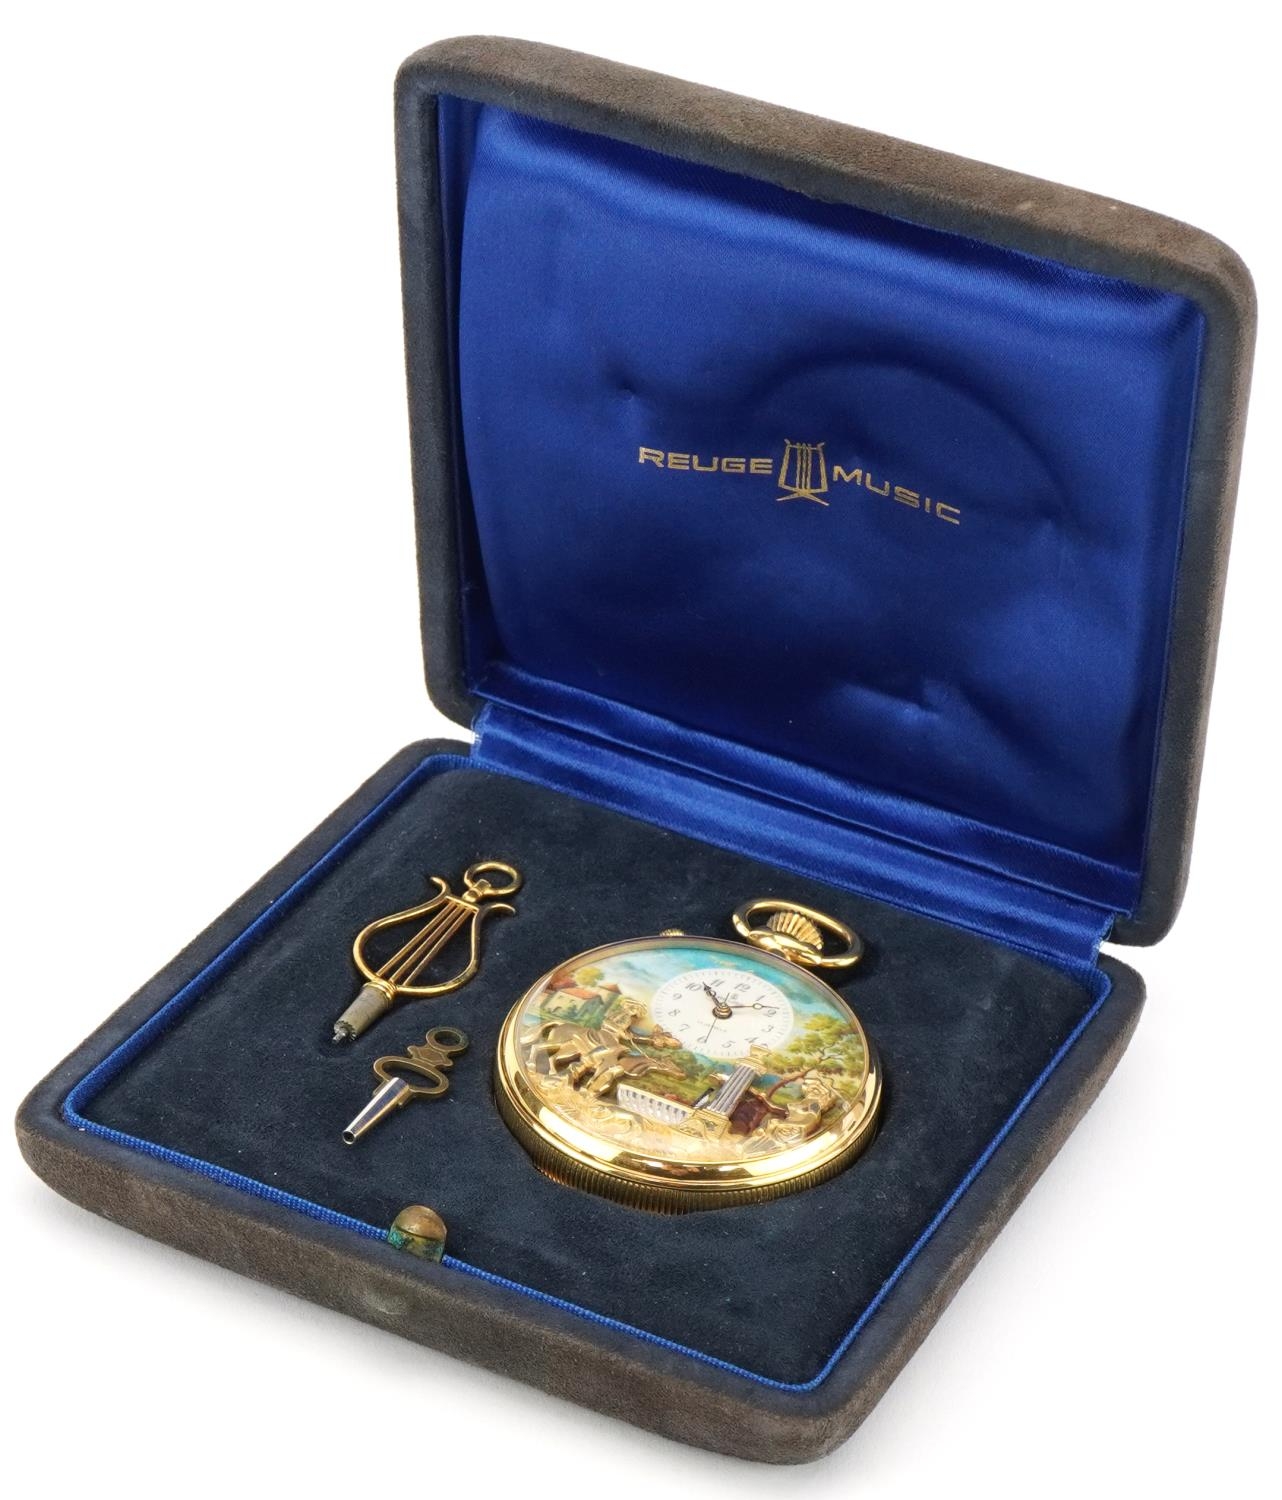 Gentlemen's gold plated Reuge Music open face pocket watch with box numbered 2443, 56mm in diameter - Image 2 of 8